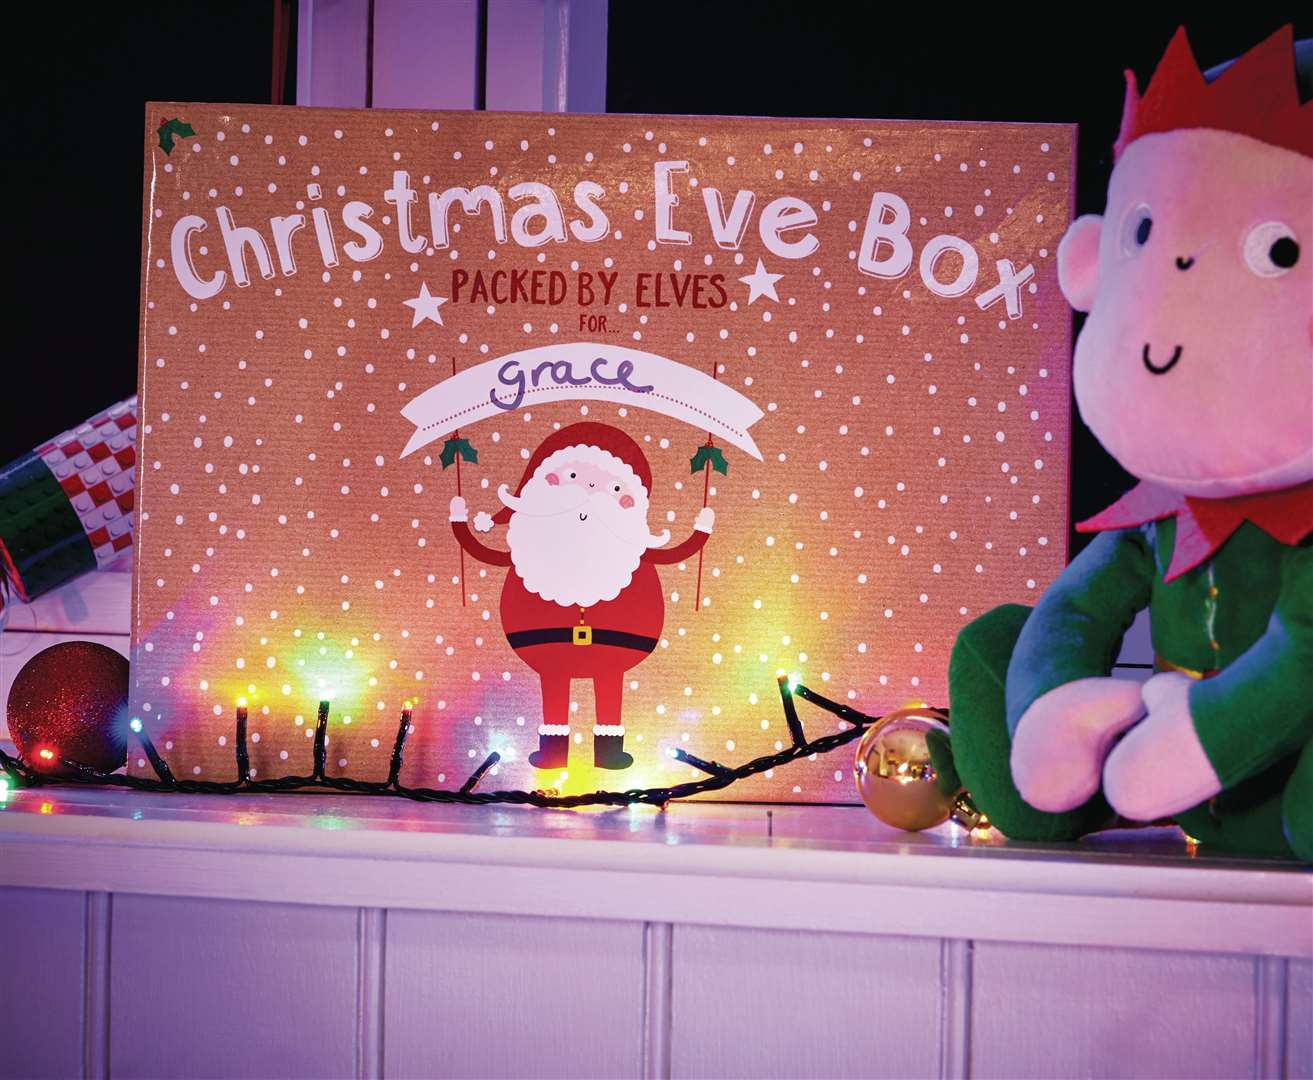 Do your elves leave a Christmas Eve box when they head back to the North Pole?